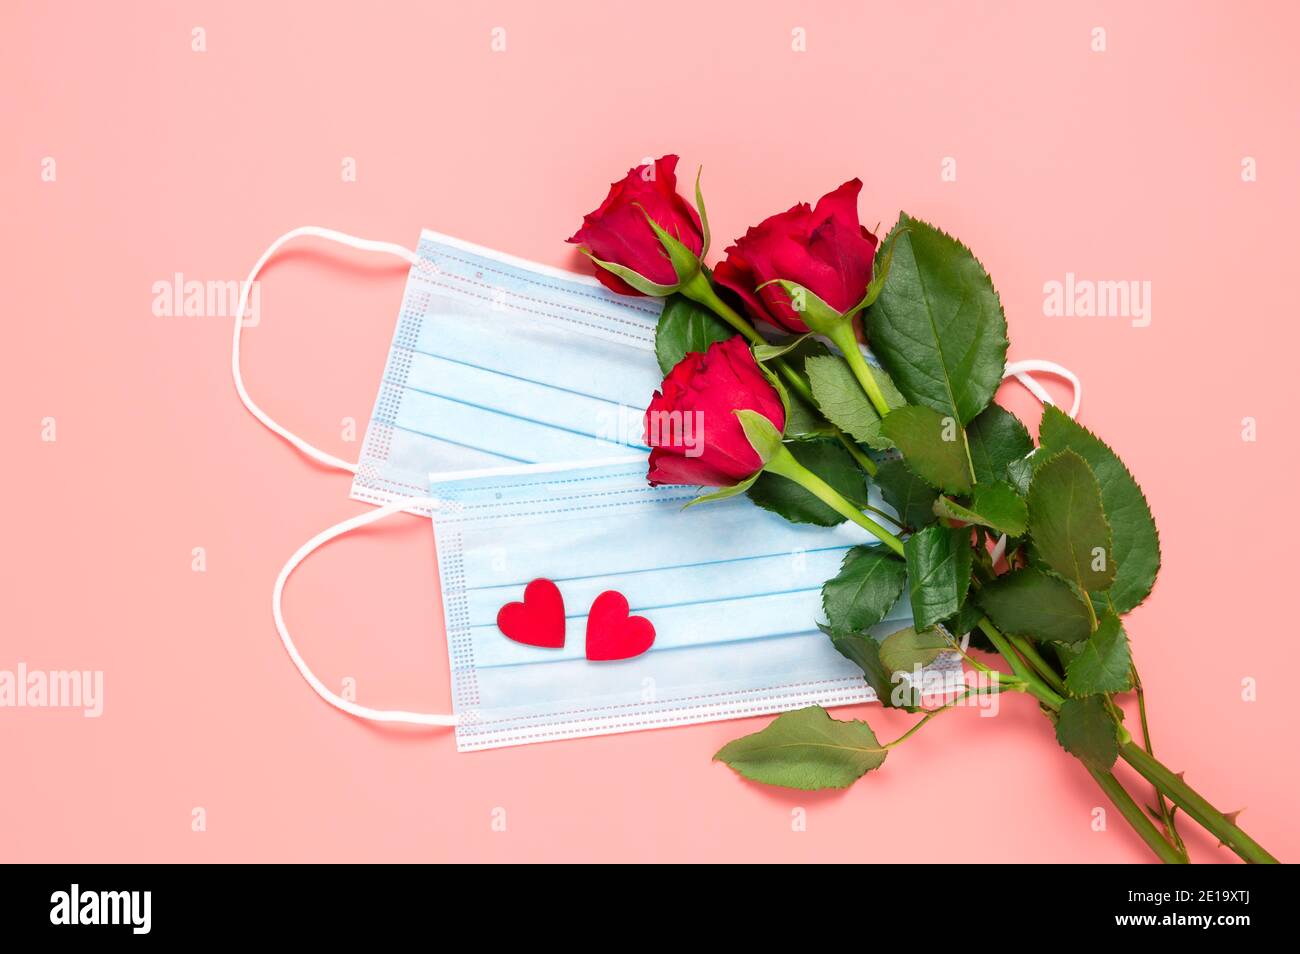 Red roses and disposable face masks with two hearts on pink background. Mothers, womens or Valentines day celebration during coronavirus pandemic Stock Photo